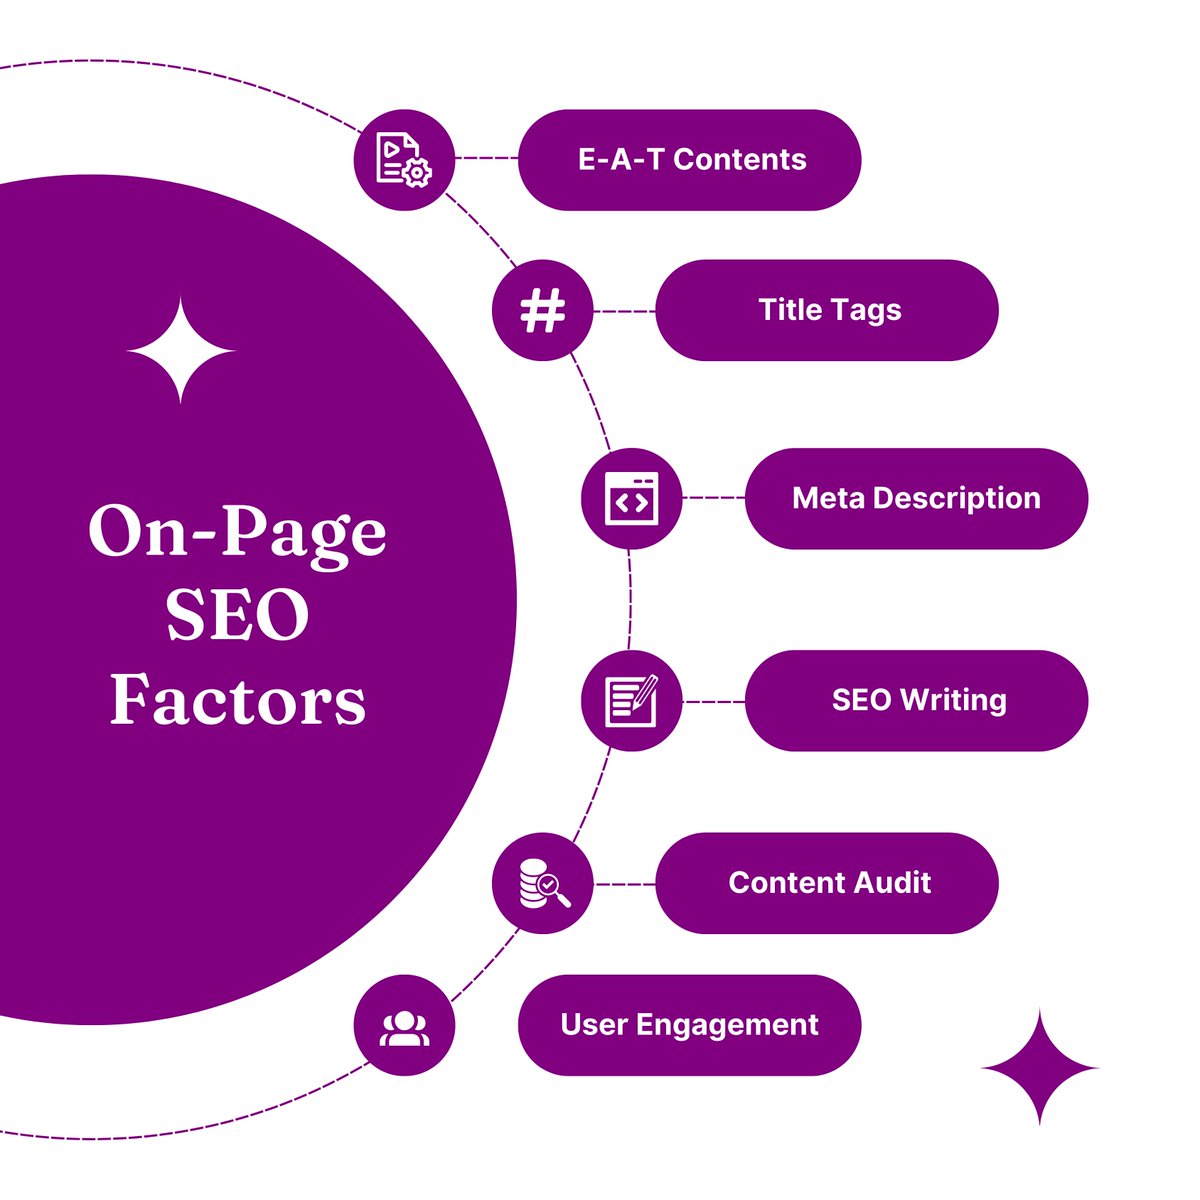 Lot of agencies focus on off page seo, but on-page content and technical factors, are critical to success 

#OnPageSEO #EATContents #TitleTags #MetaDescription #ContentAudit #SEOWriting #UserEngagement #SearchEngineOptimization